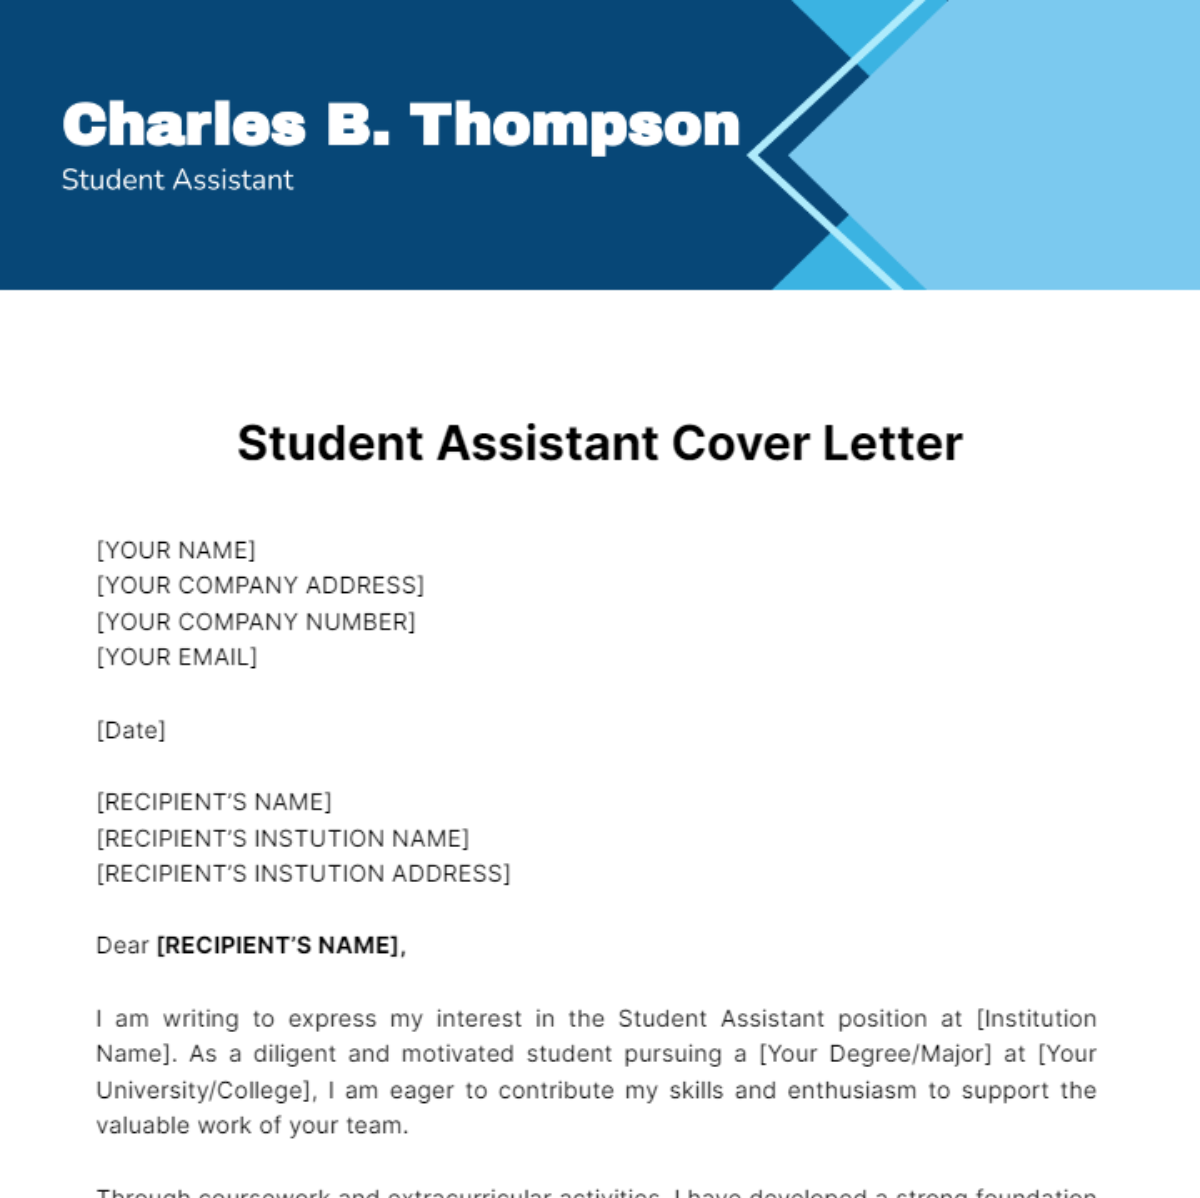 Student Assistant Cover Letter Template